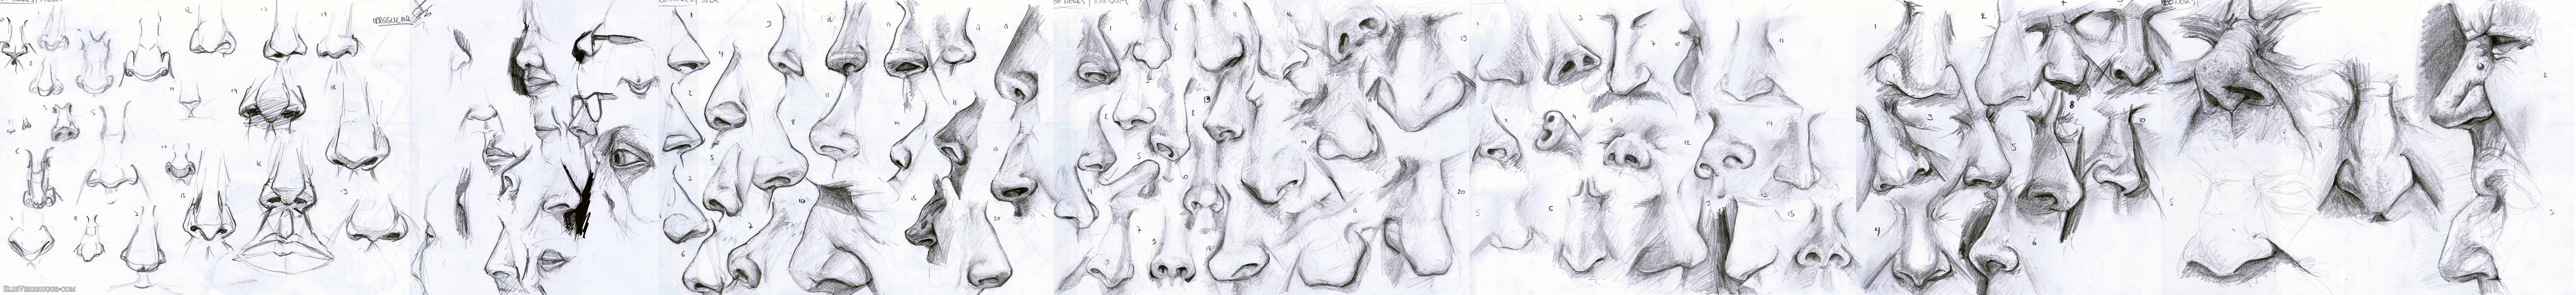 100 Noses